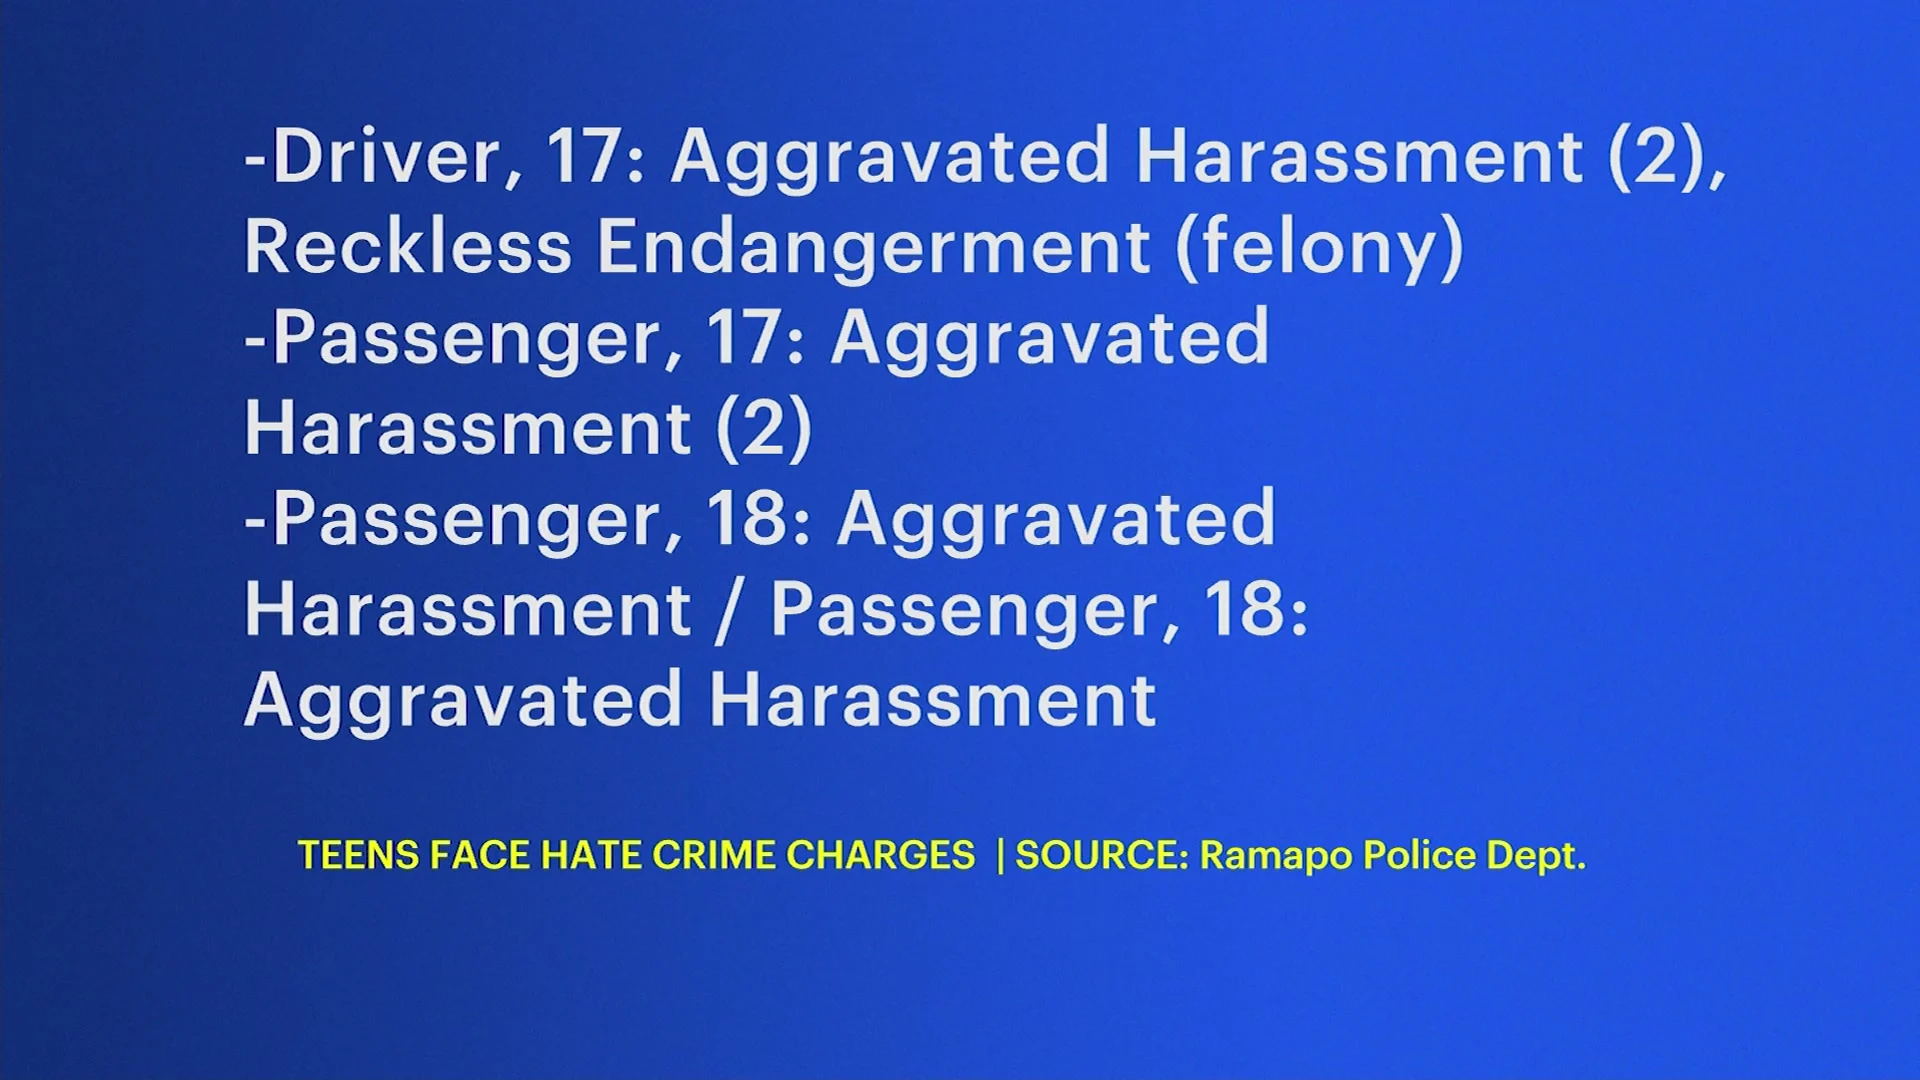 4 teens face hate crime charges in Ramapo, accused of antisemitic drive-by harassment